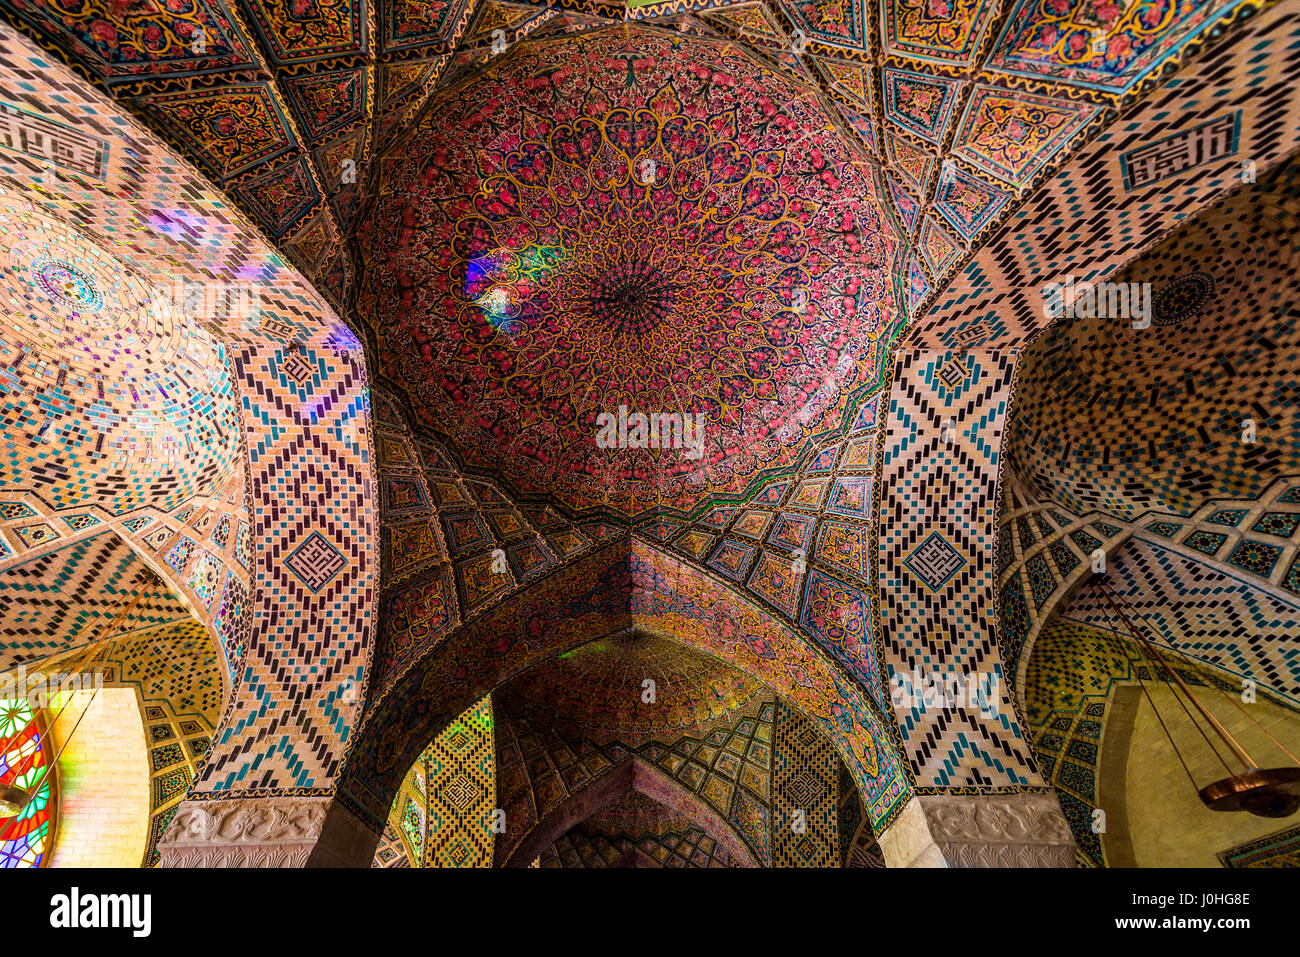 Ceiling of Pink Mosque (Nasir ol Molk Mosque) in Gowad-e-Araban district of Shiraz city, capital of Fars Province in Iran Stock Photo